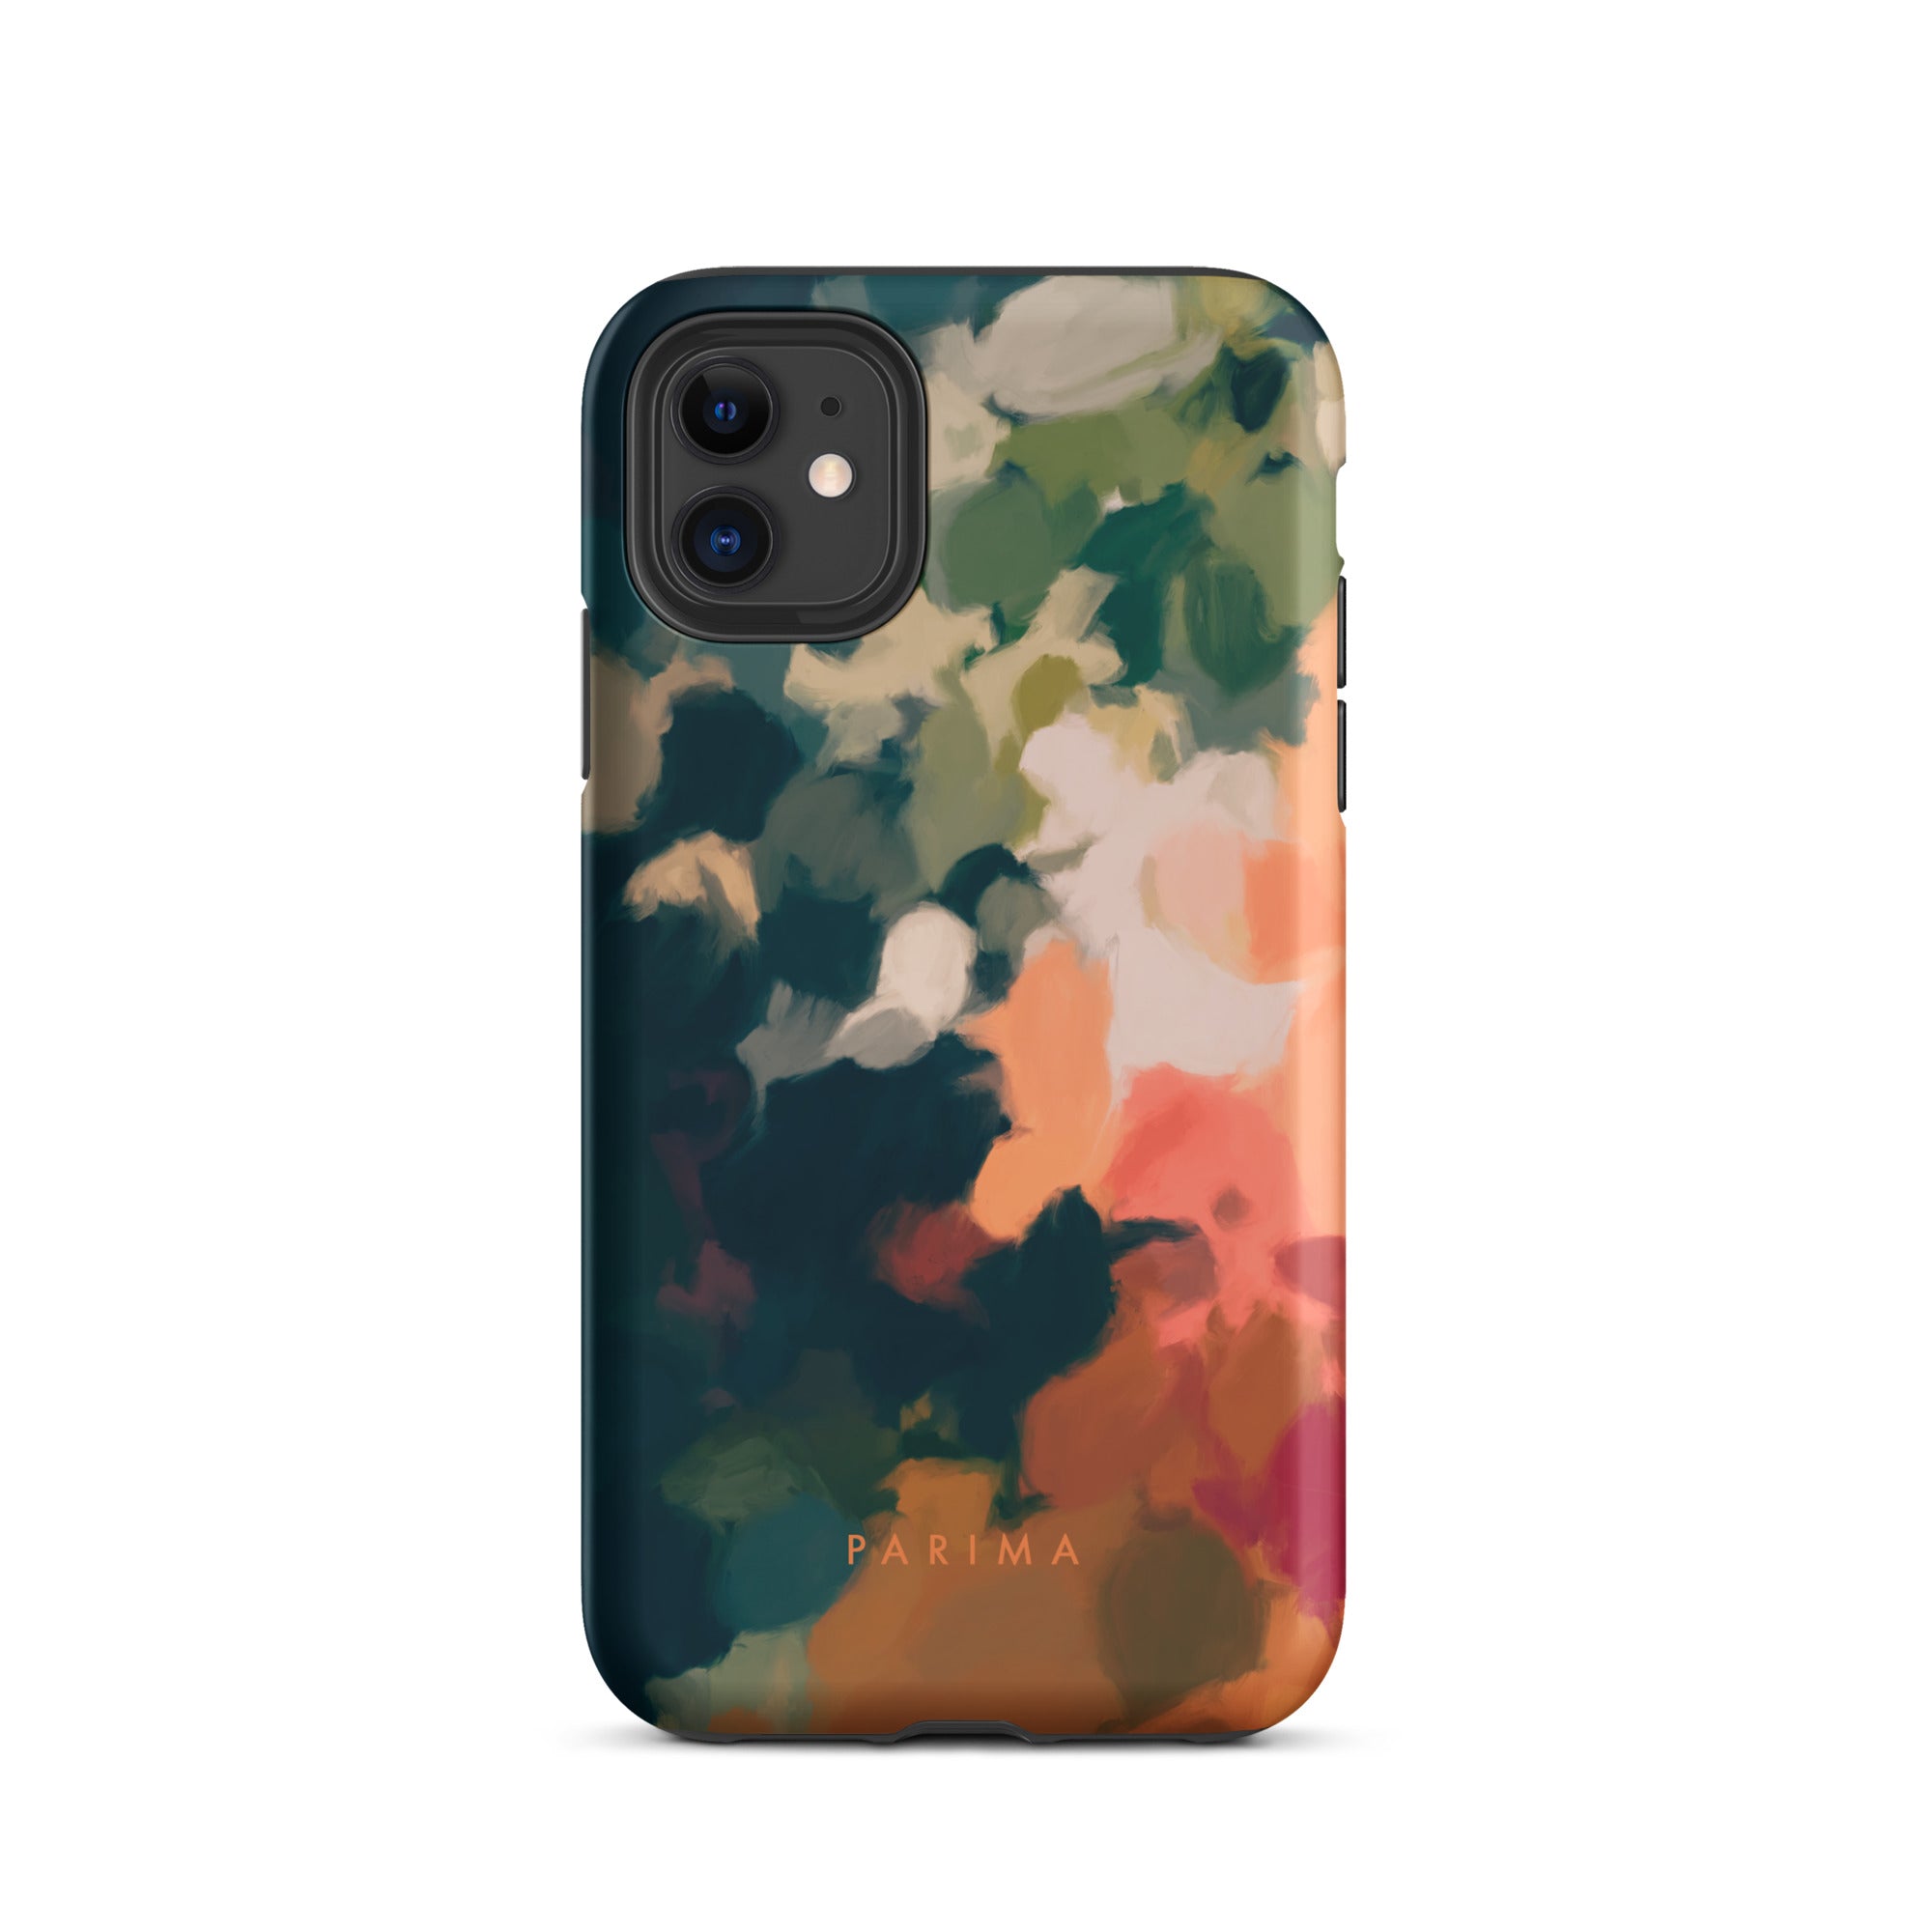 Ria, blue and orange abstract art - iPhone 11 tough case by Parima Studio